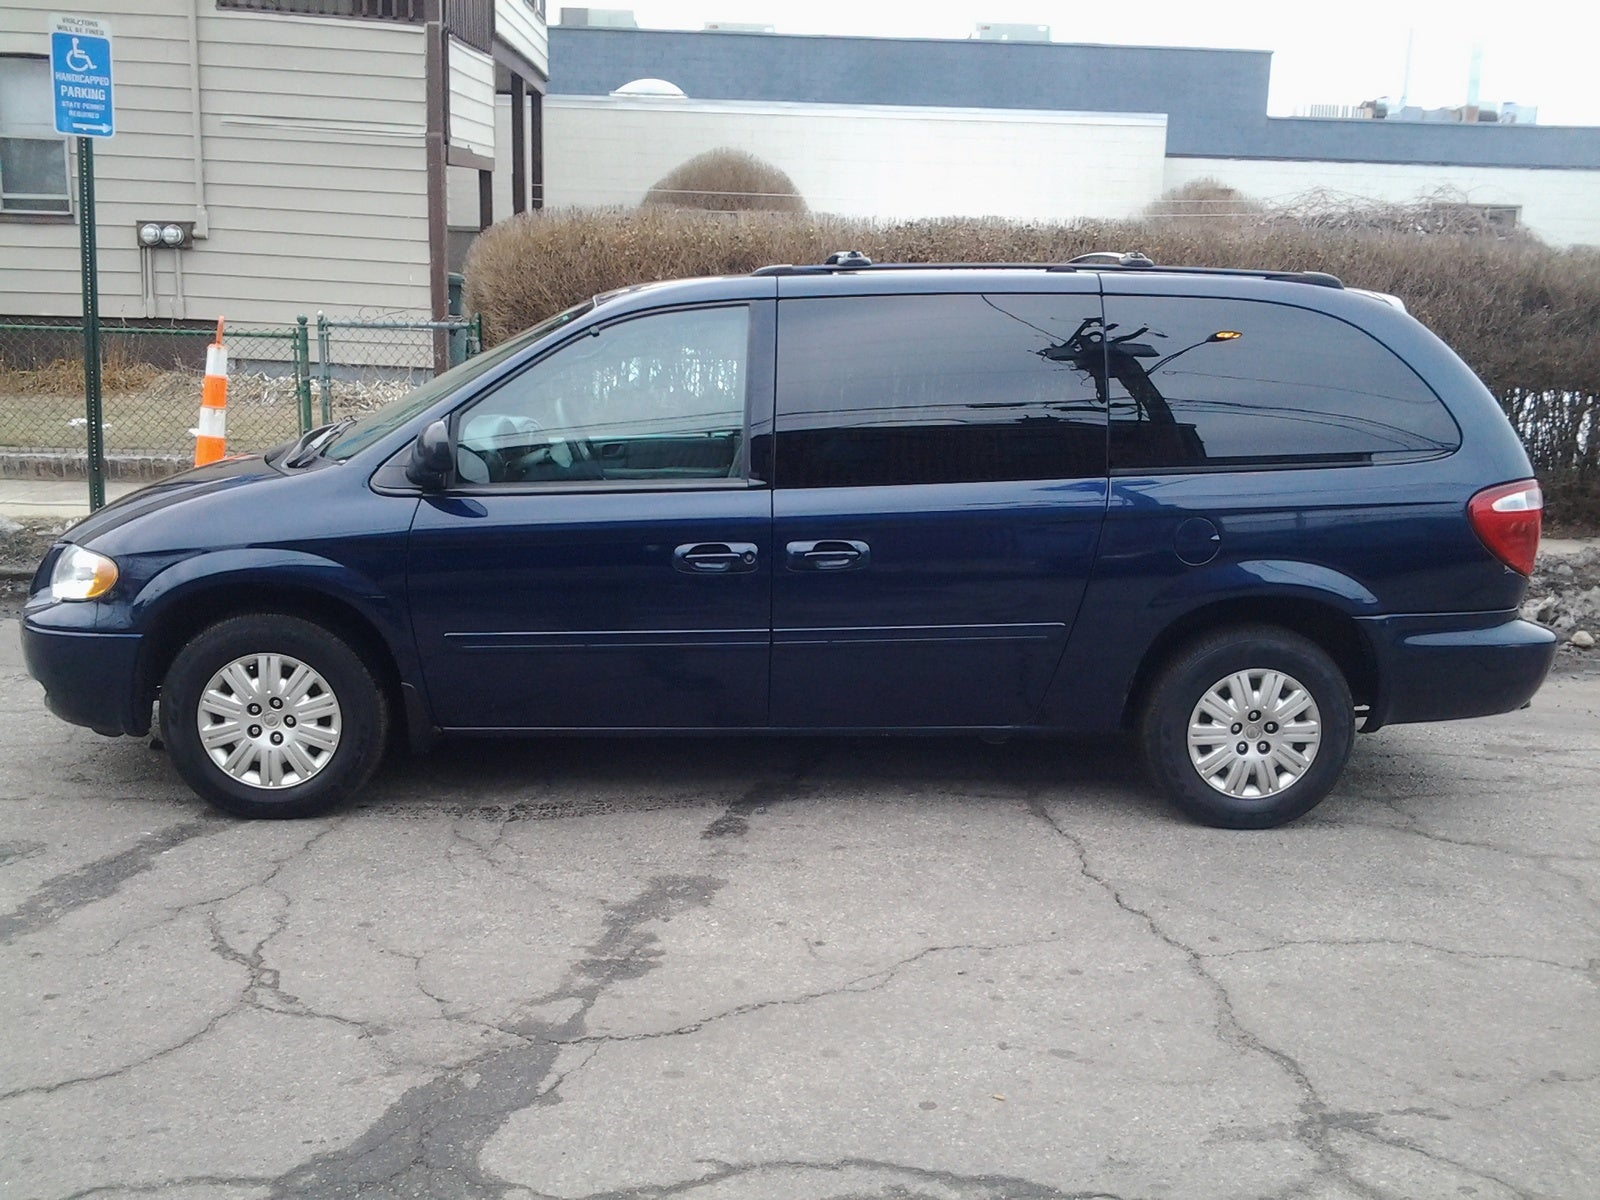 2005 Chrysler Town & Country Pictures CarGurus